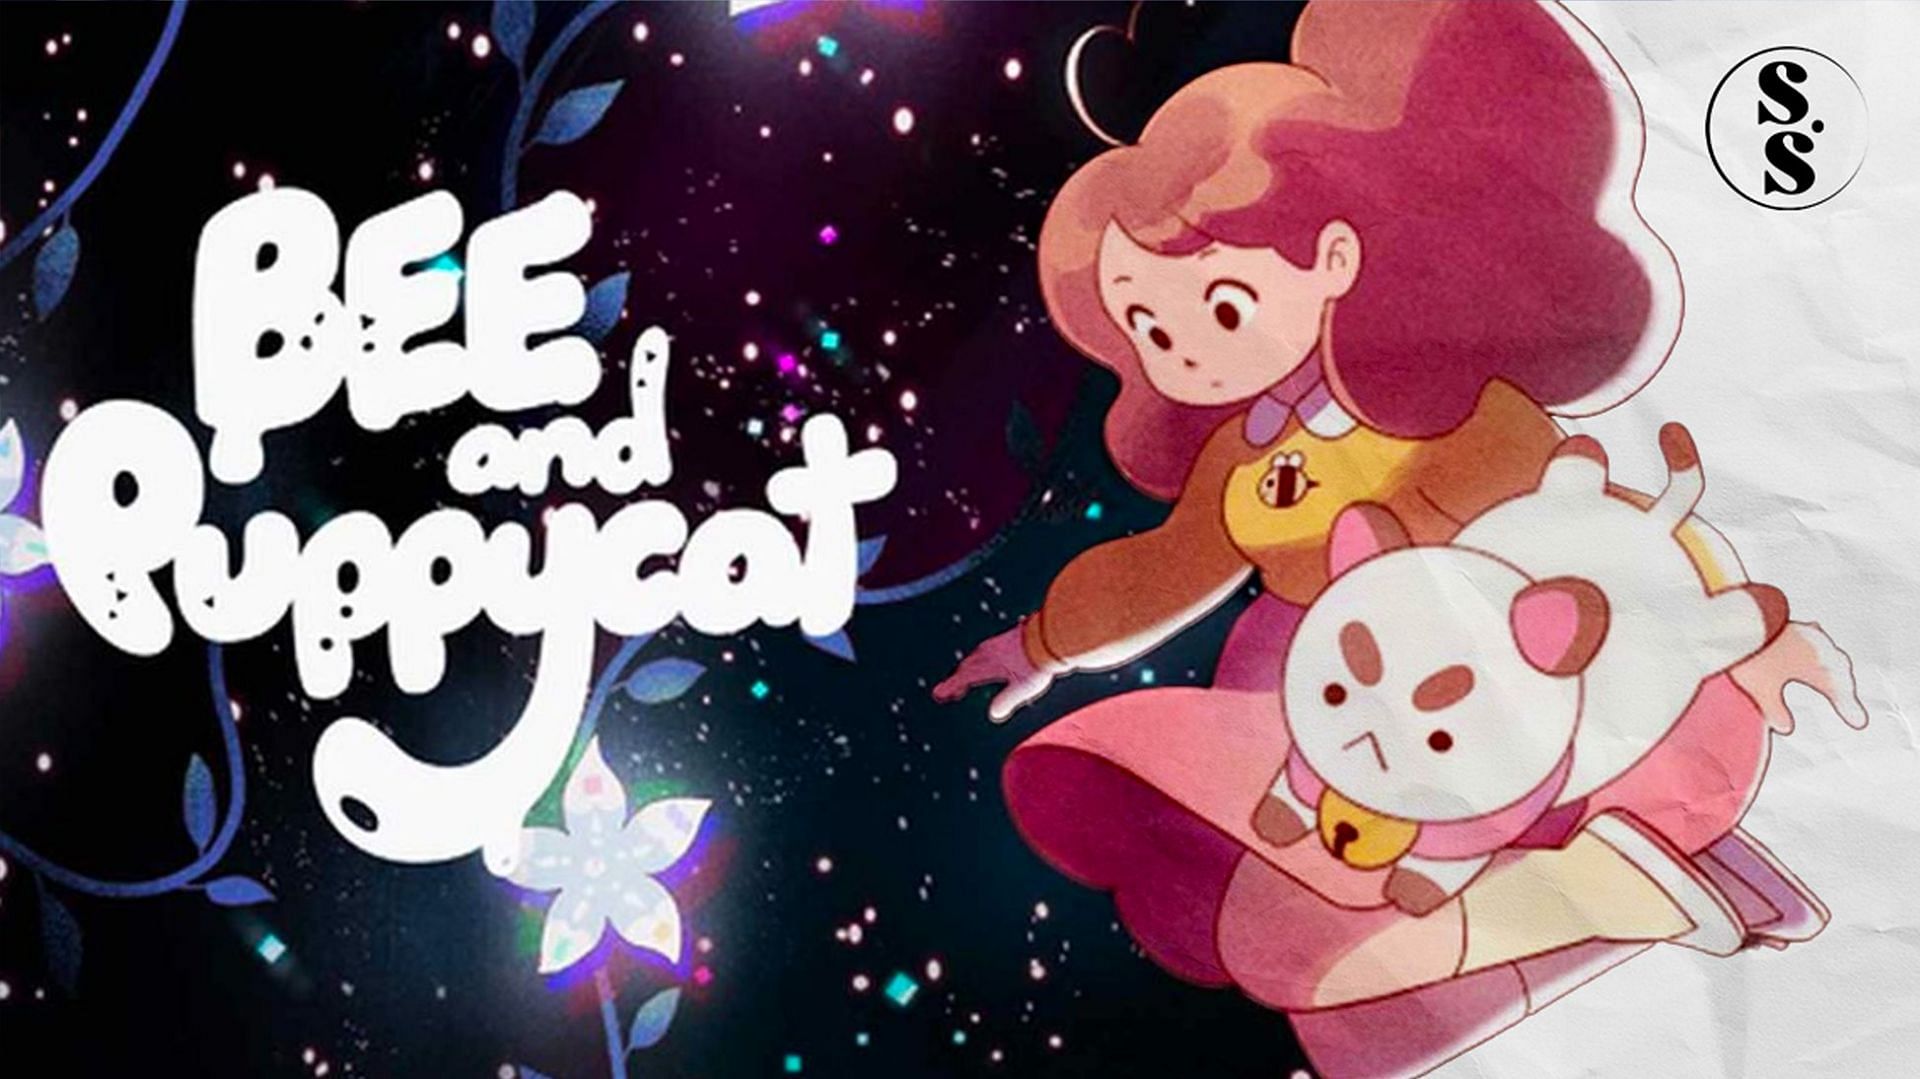 Bee and Puppycat by SarahSquirrels on deviantART | Bee and puppycat,  Cartoon illustration, Bee